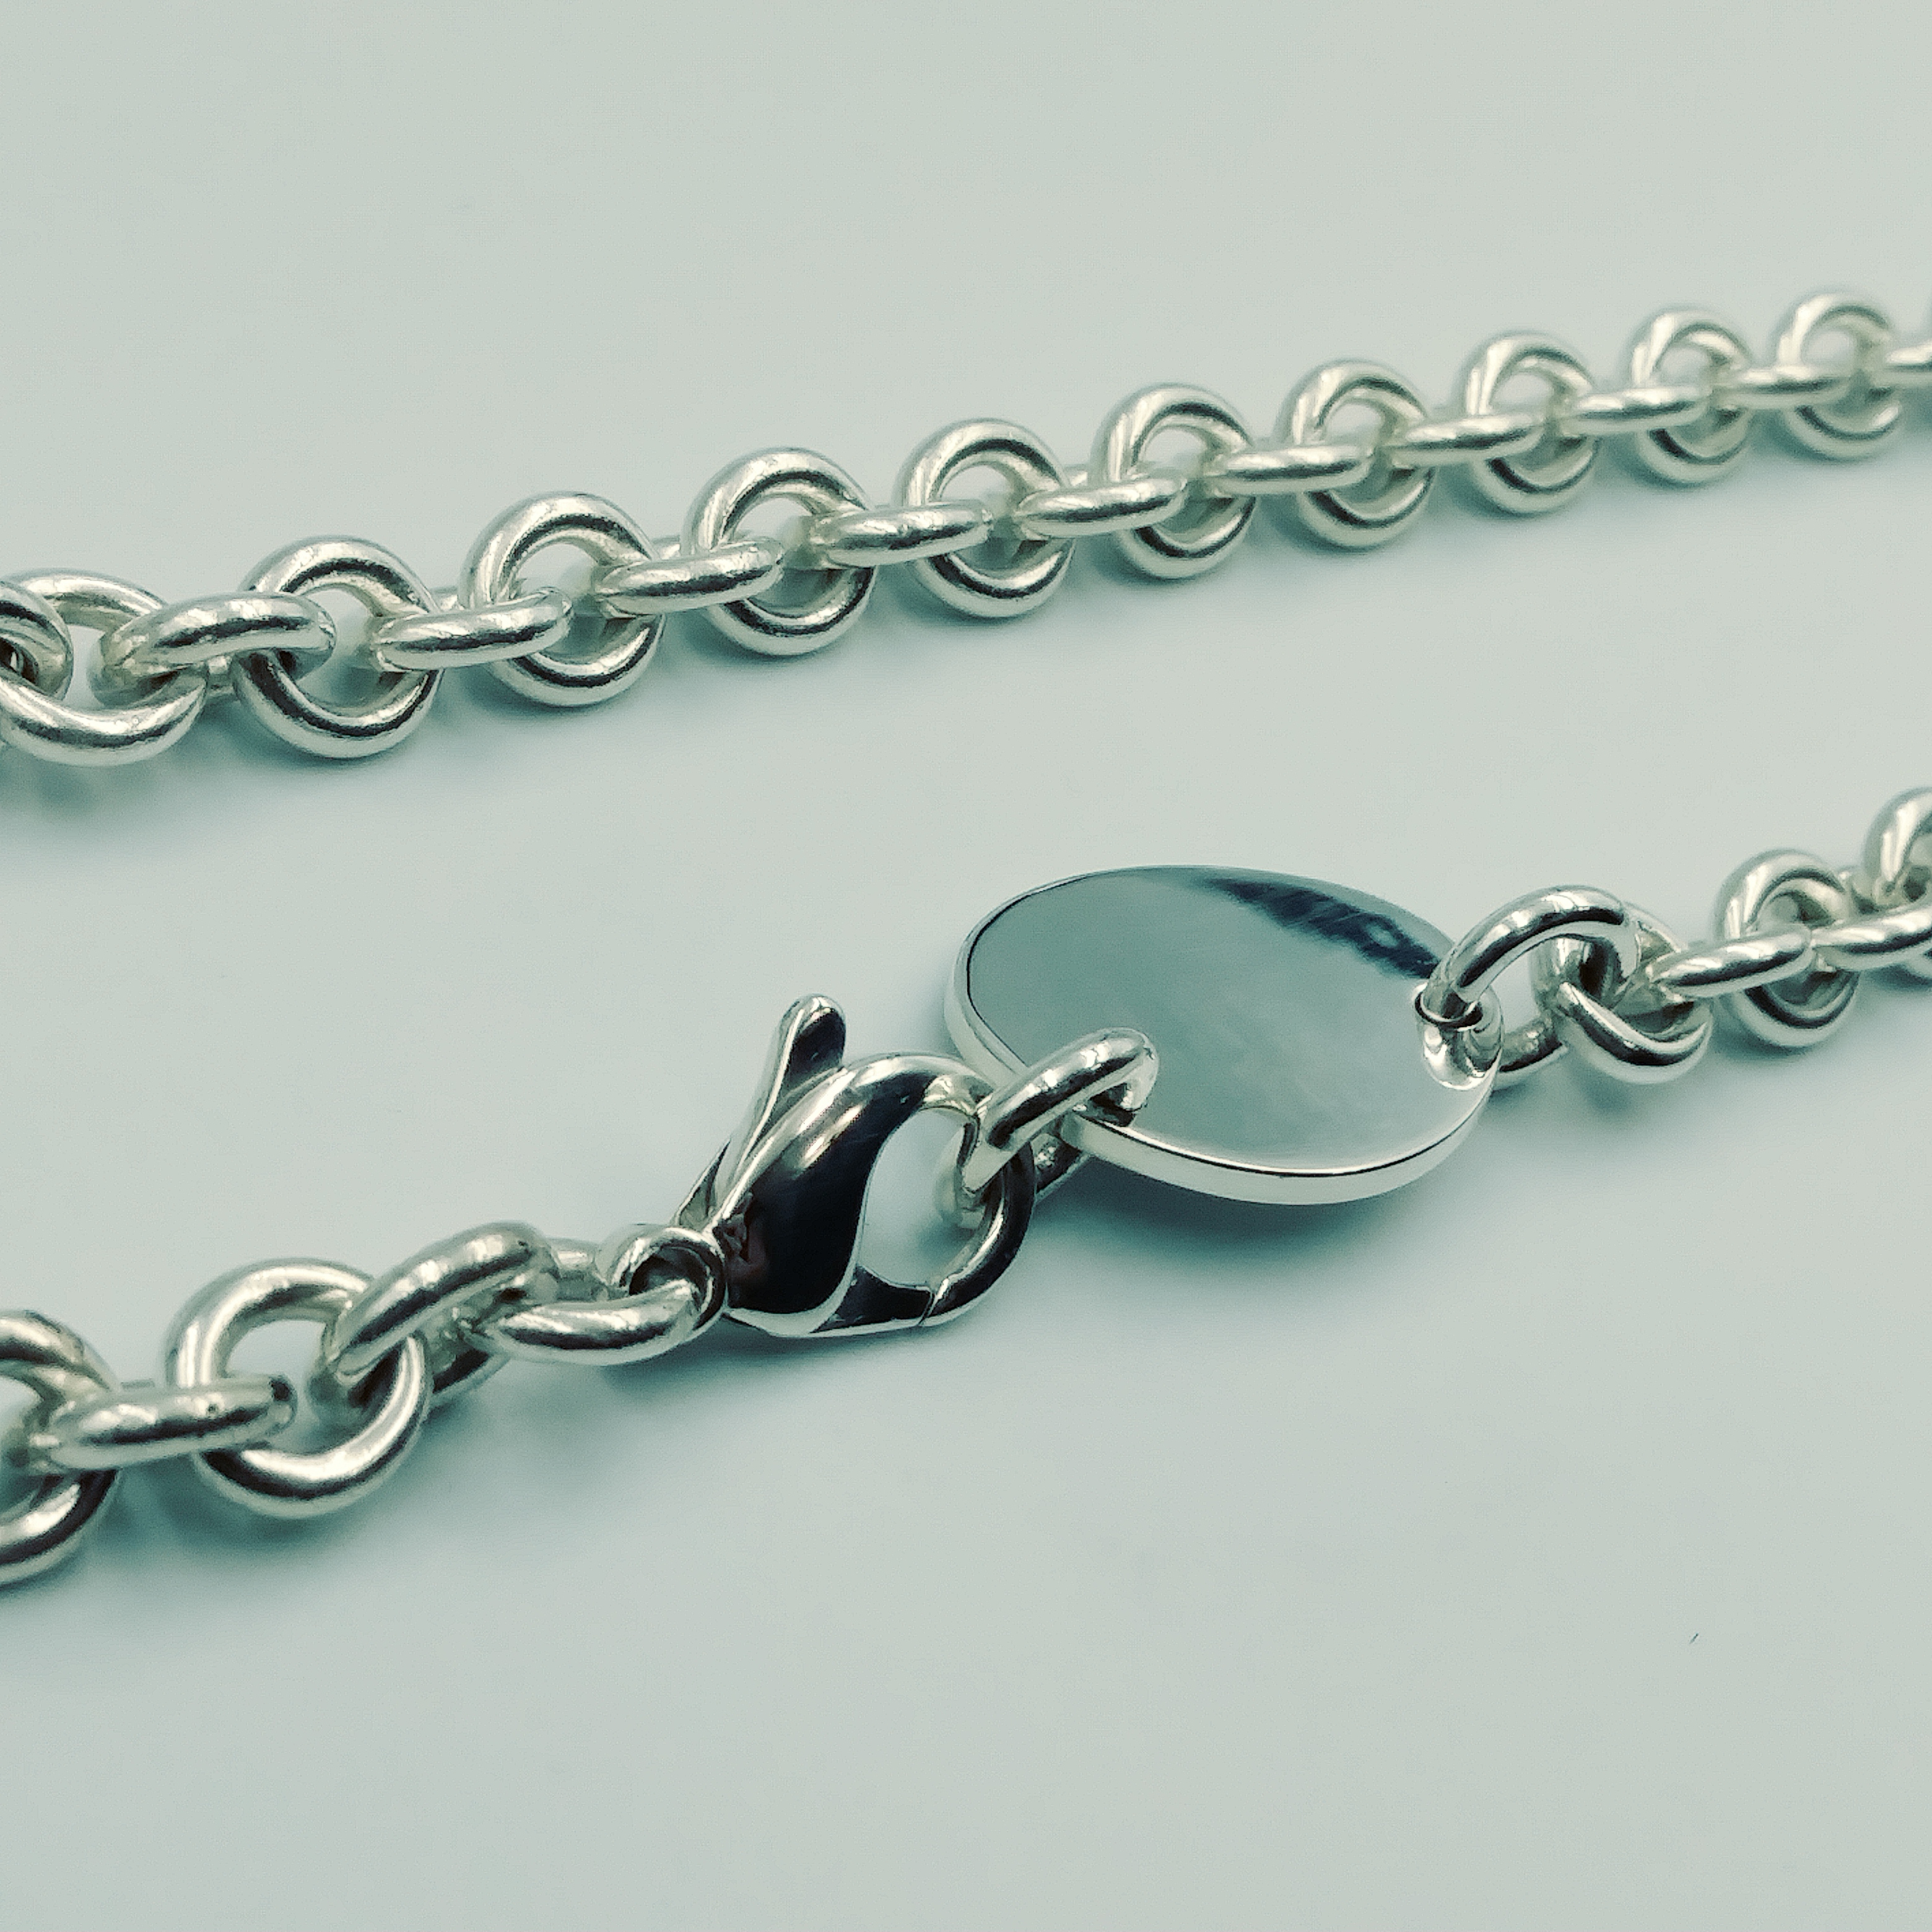 Tiffany Replacement Links Lobster Clasp / Lengthen Return to Tiffany Oval  Tag Choker Necklace